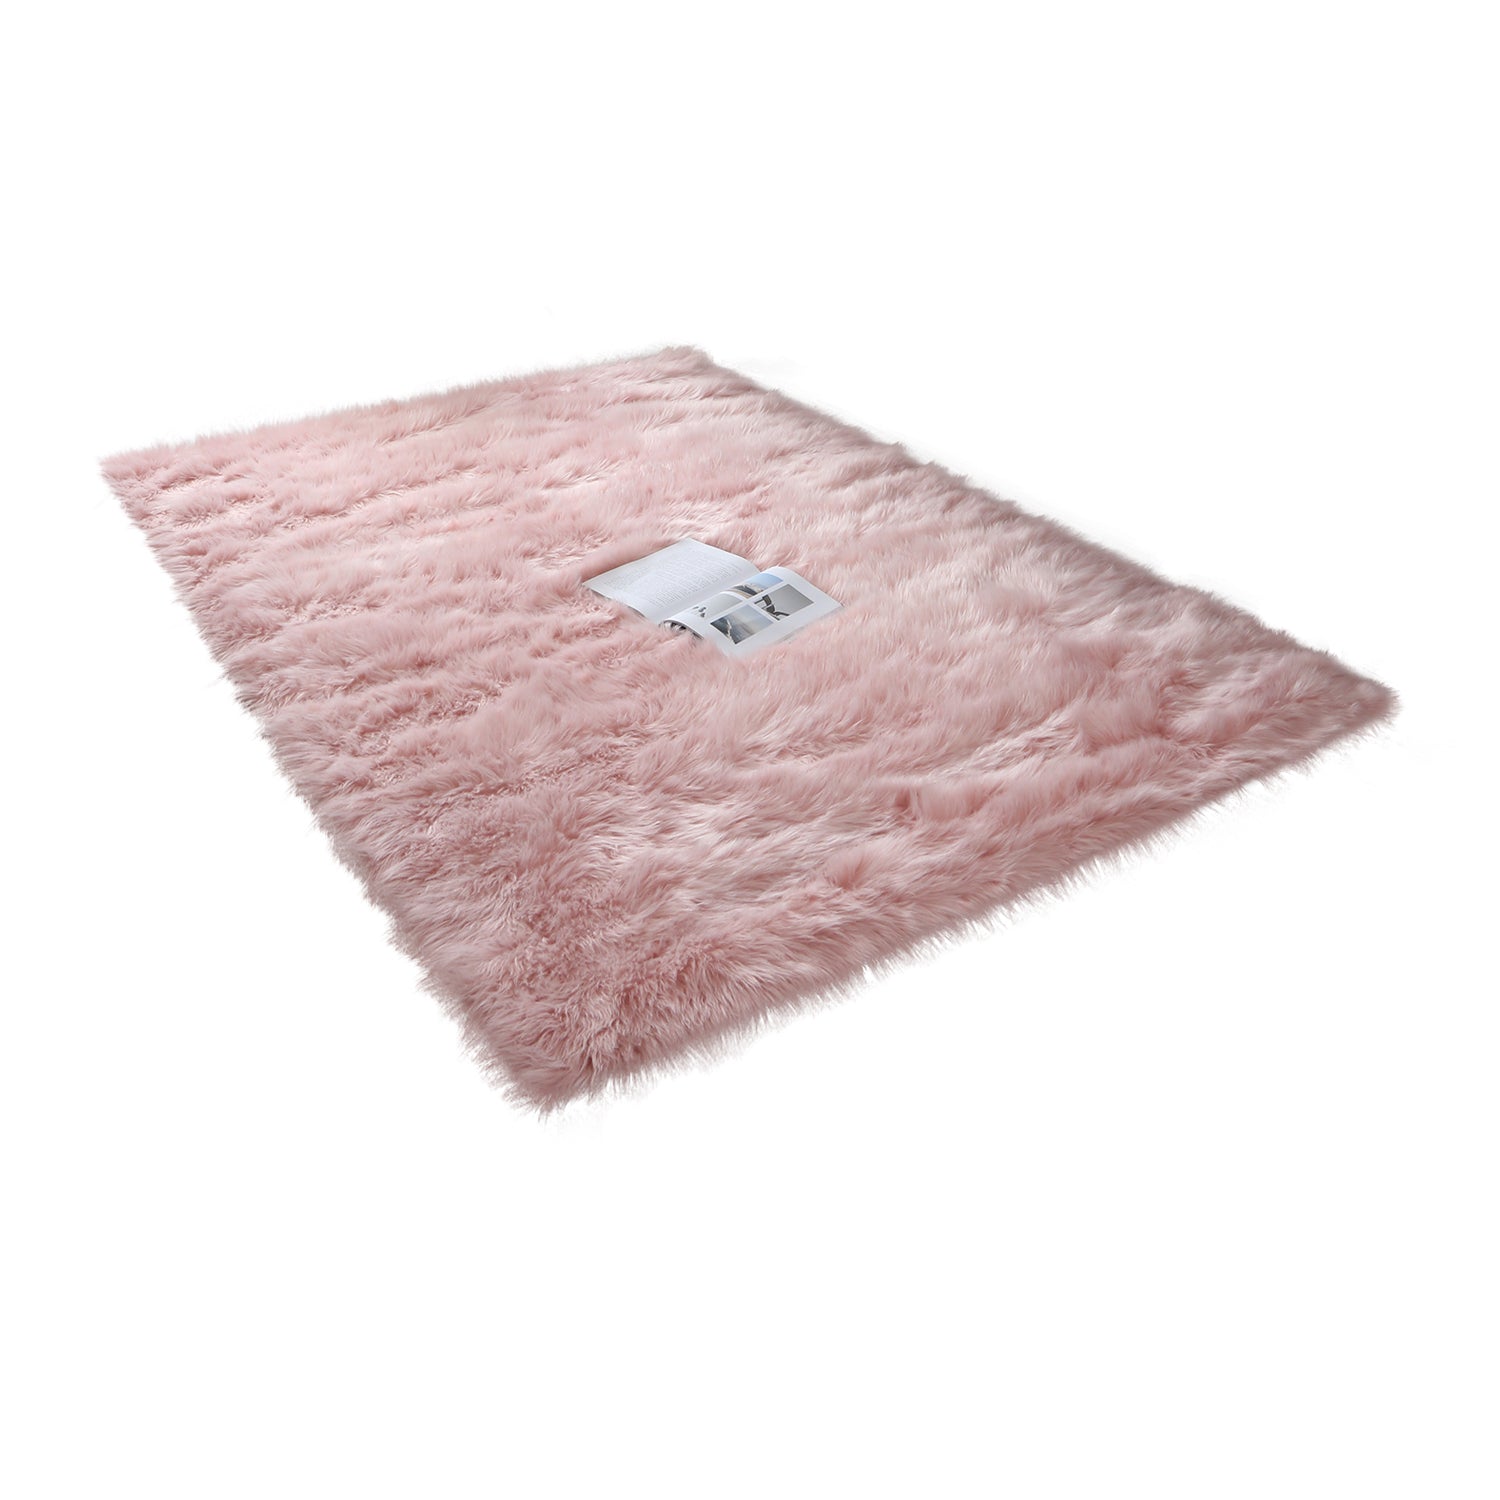 5' x 2.96' Cozy Collection Ultra Soft Fluffy Faux Fur Sheepskin Area Rug (Pink)